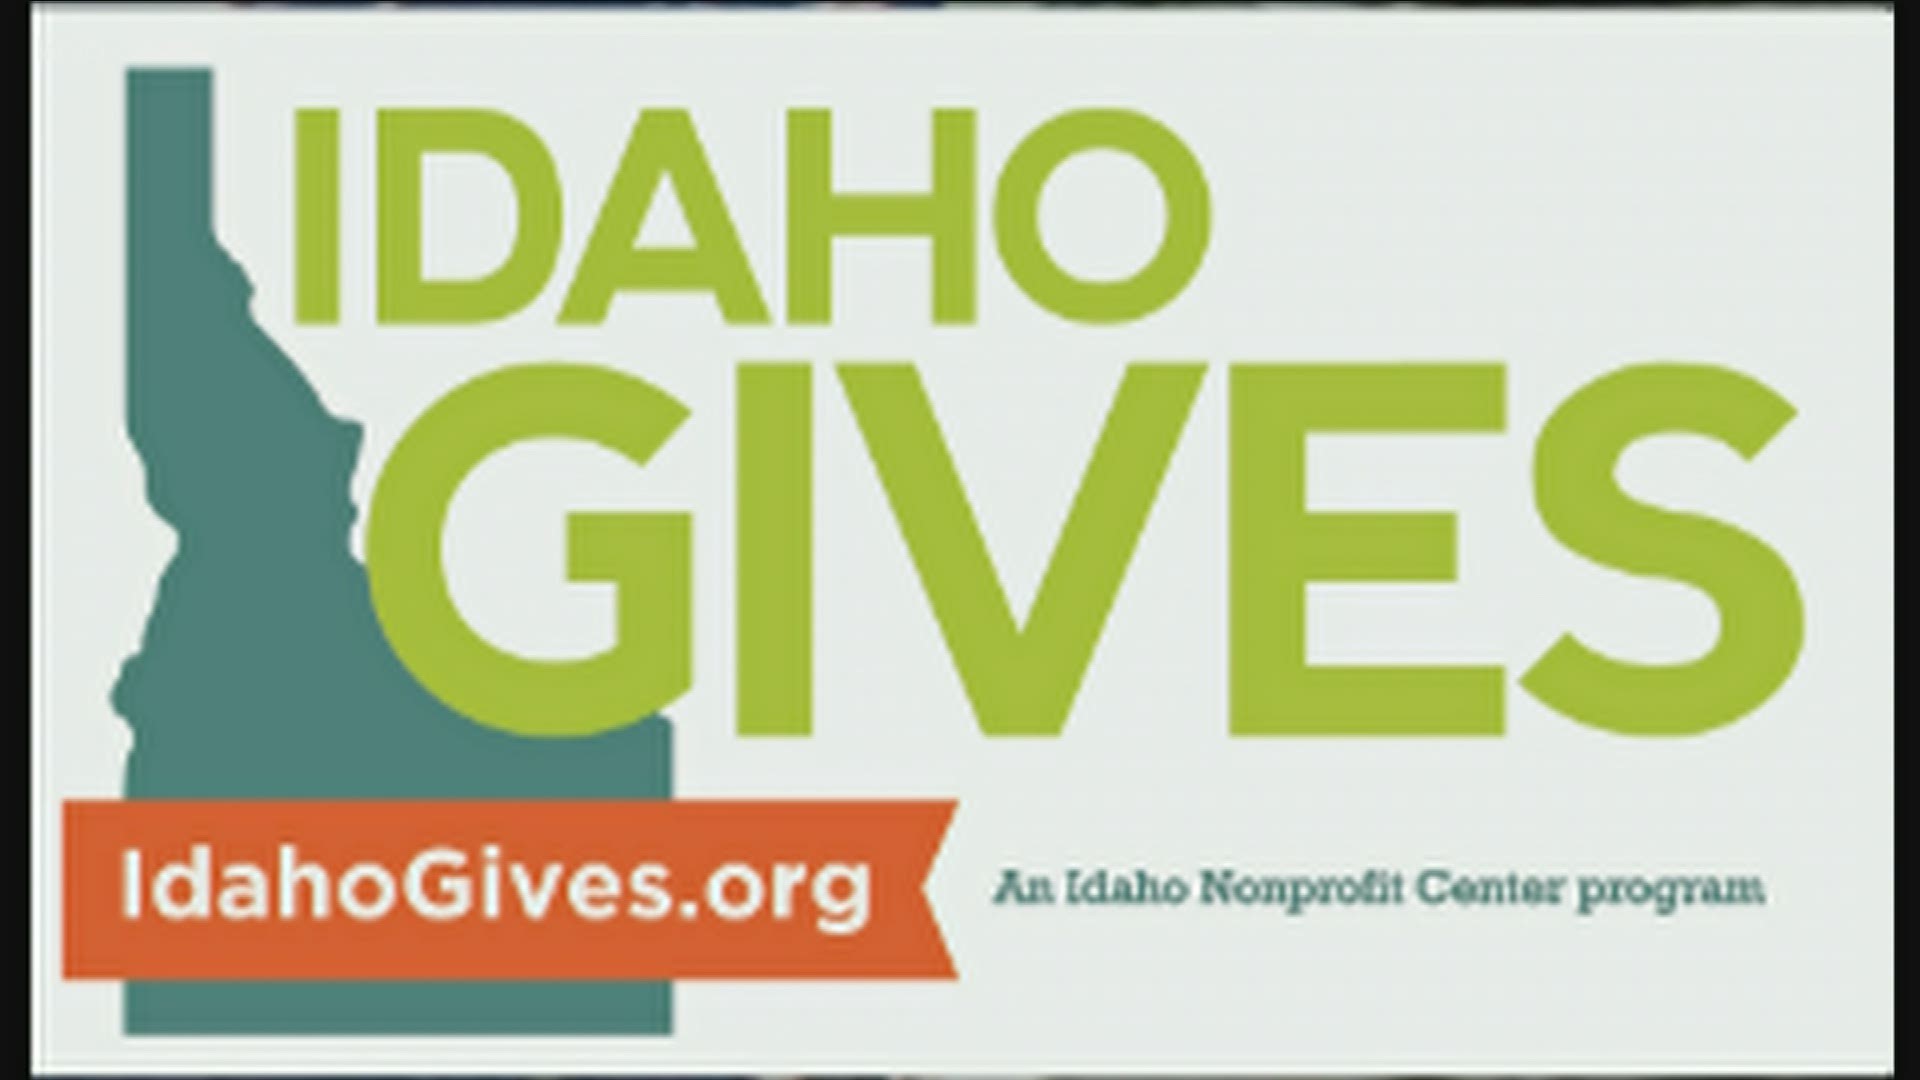 KTVB talked with Amy Little, director of  the Idaho Nonprofit Center to get her take on the success of this year's Idaho Gives campaign.